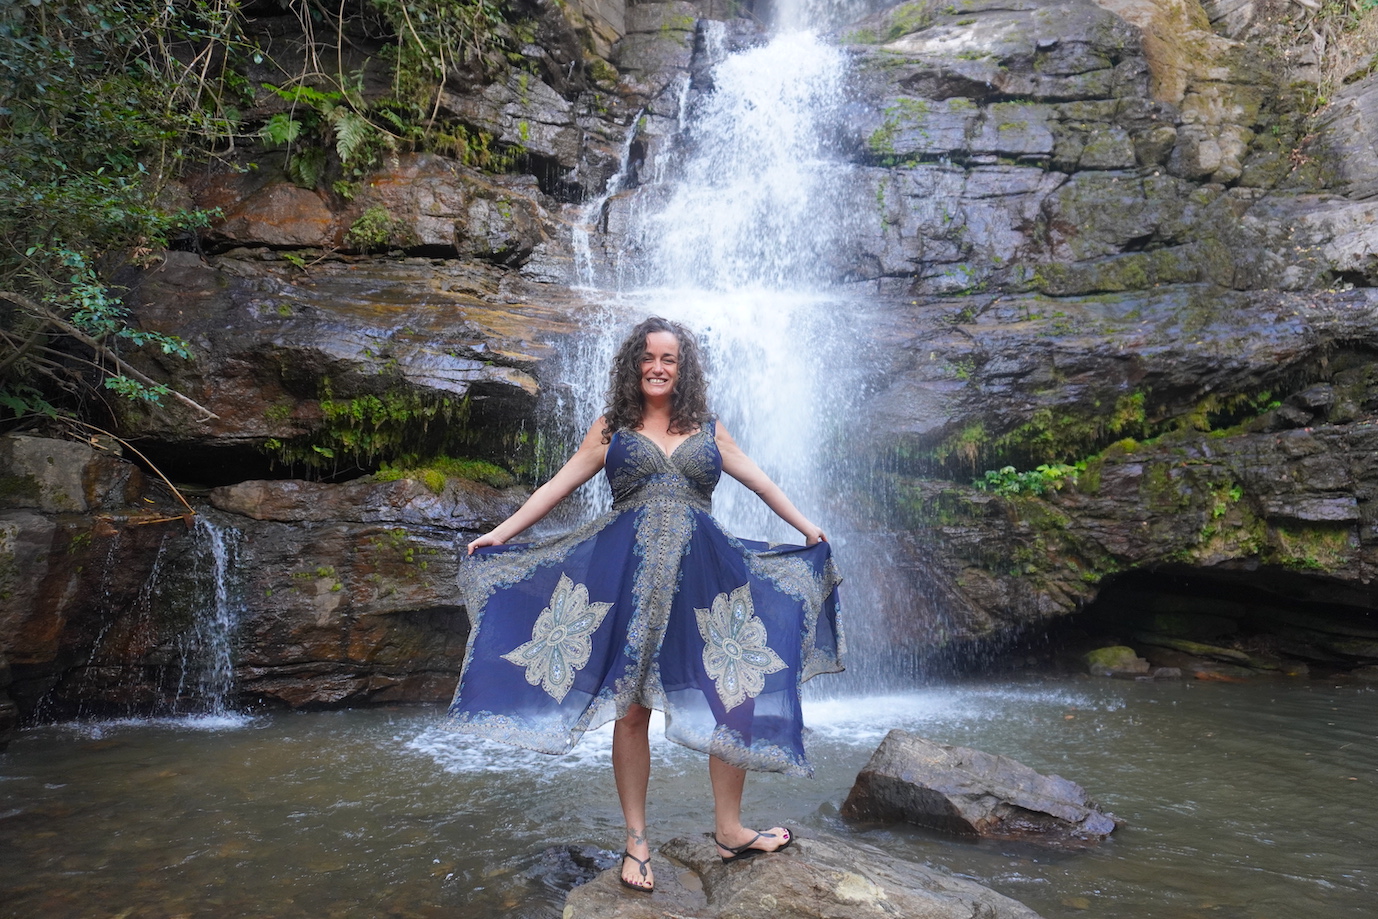 Pilar with a very nice blue dress expanded in the Uluguru mountains, Choma waterfall